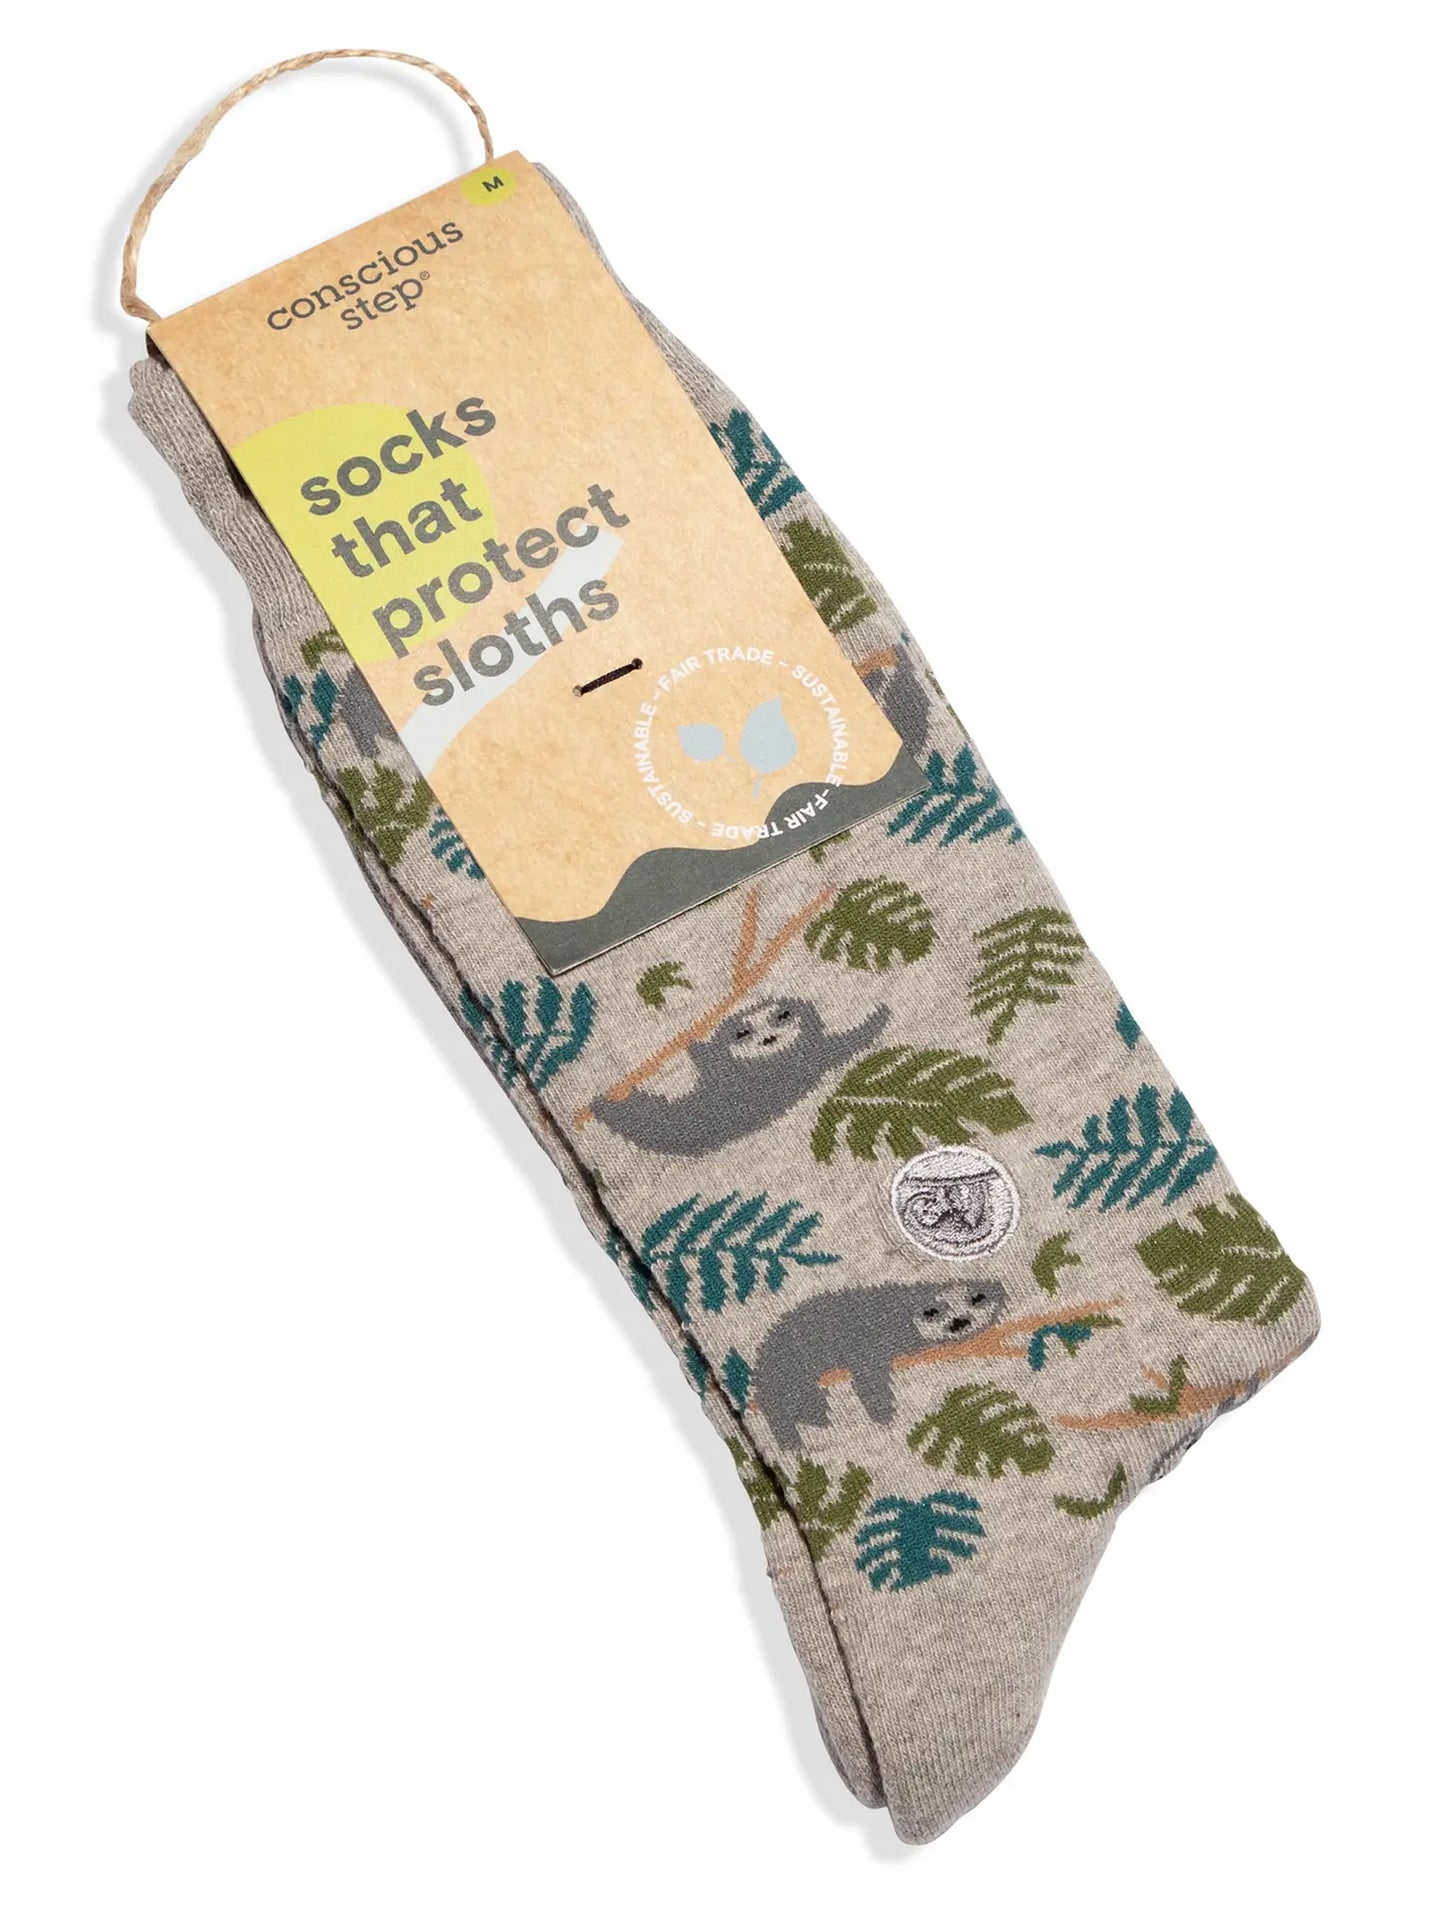 Socks that Protect Sloths - Beige with Palms and Sloths